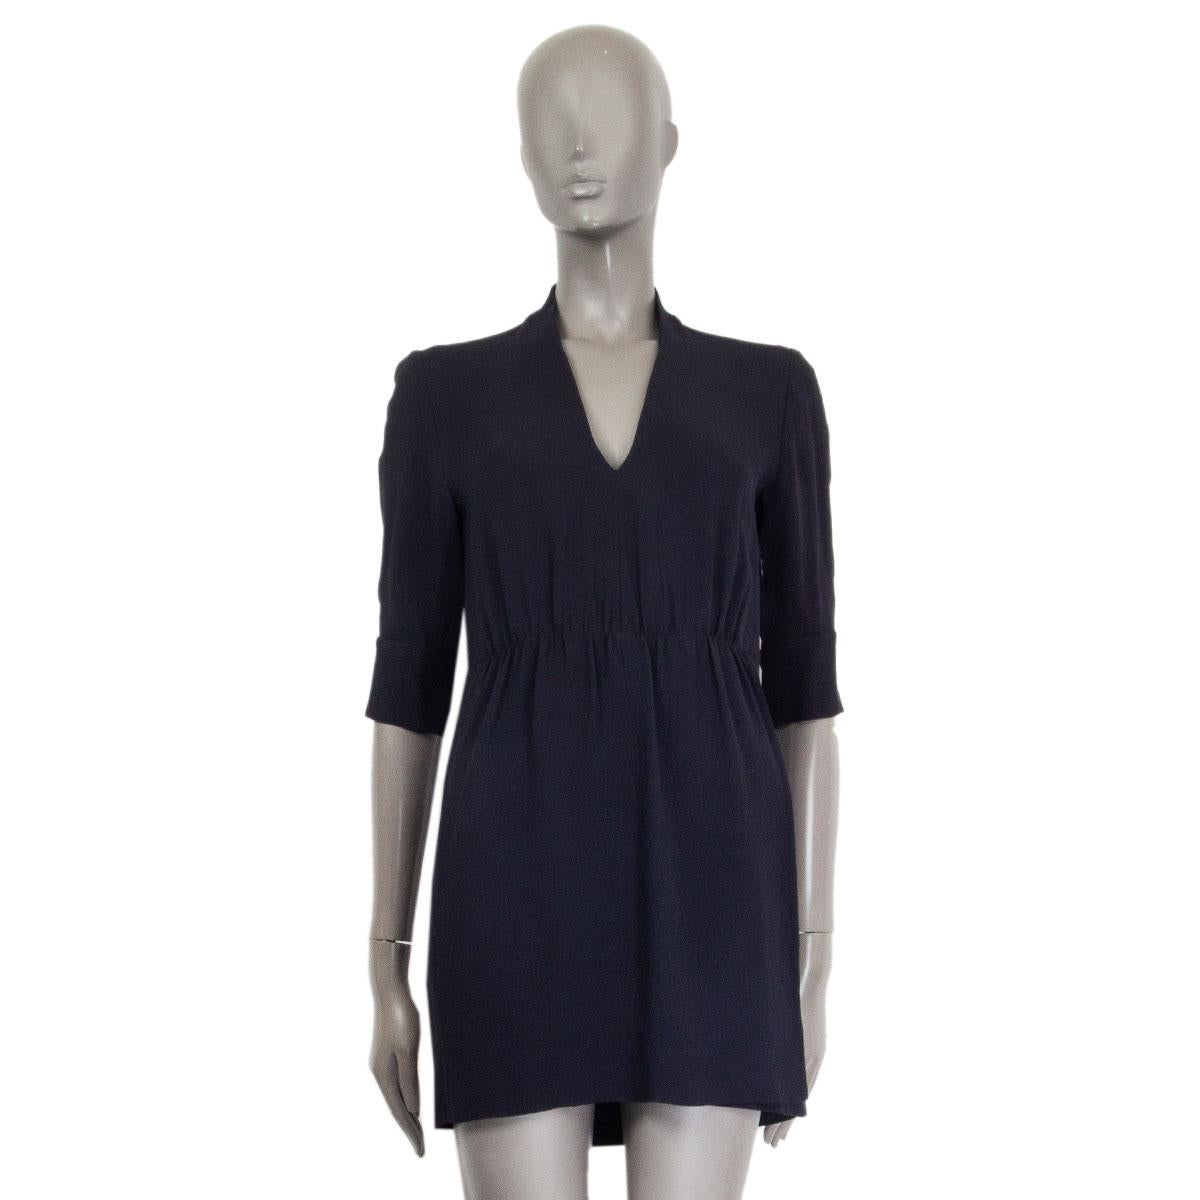 authentic Stella McCartney double layer in midnight blue viscose (79%) acetate (21%) with detailed cut-out and the back of the sleeve, V-neckline and a gathered waistband. Unlined. Closes with a concealed zipper on the left side. Has been worn and